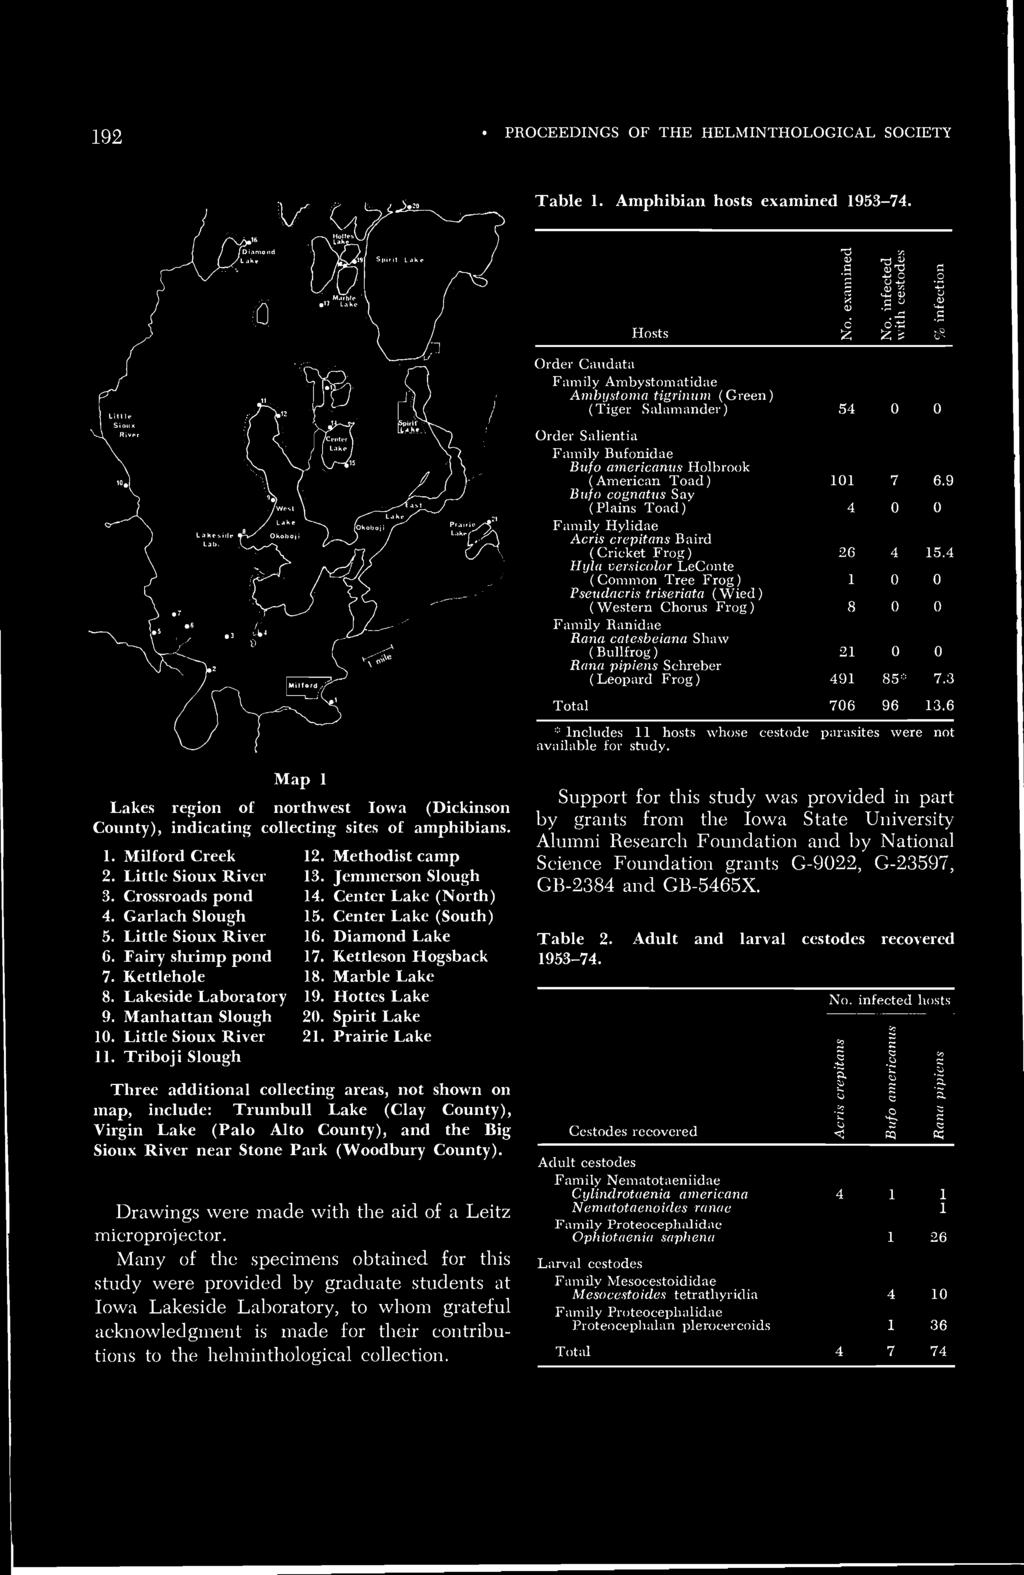 192 PROCEEDINGS OF THE HELMINTHOLOGICAL SOCIETY Table 1. Amphibian hosts examined 1953-74. Hosts Map 1 Lakes region of northwest Iowa (Dickinson County), indicating collecting sites of amphibians. 1. Milford Creek 2.